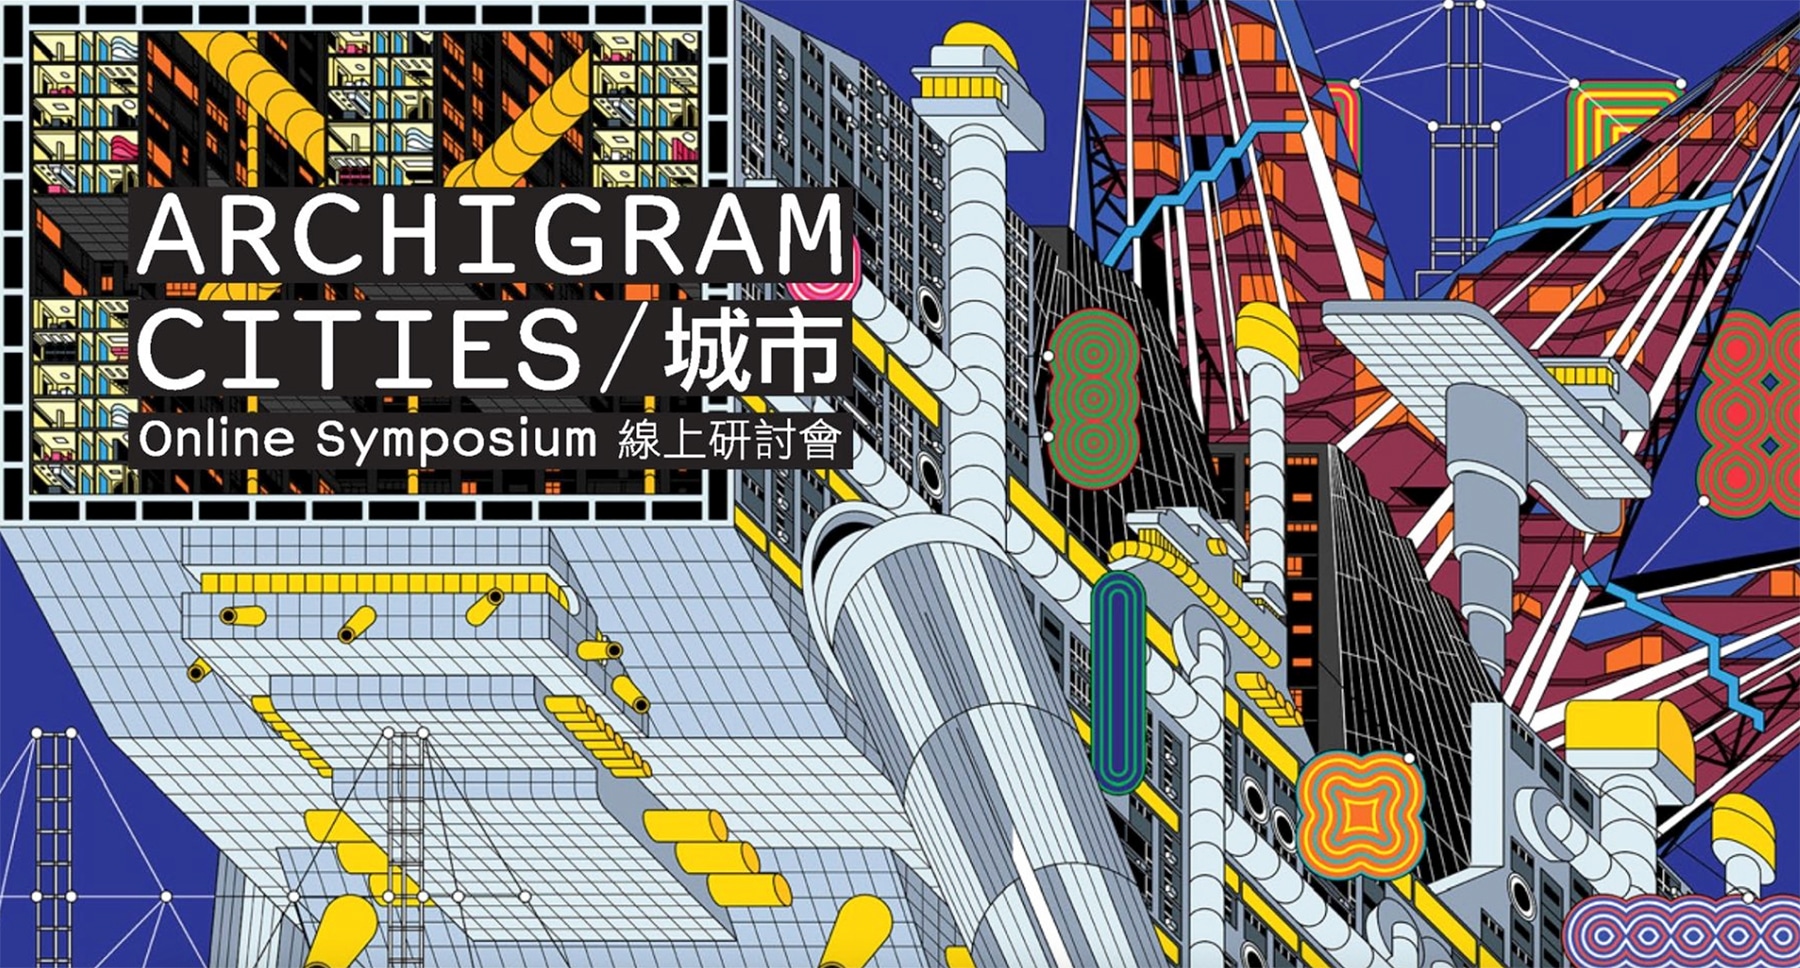 Poster for the Archigram Cities Symposium, held online from November 4–13, 2020, and sponsored by the University of Hong Kong Department of Architecture